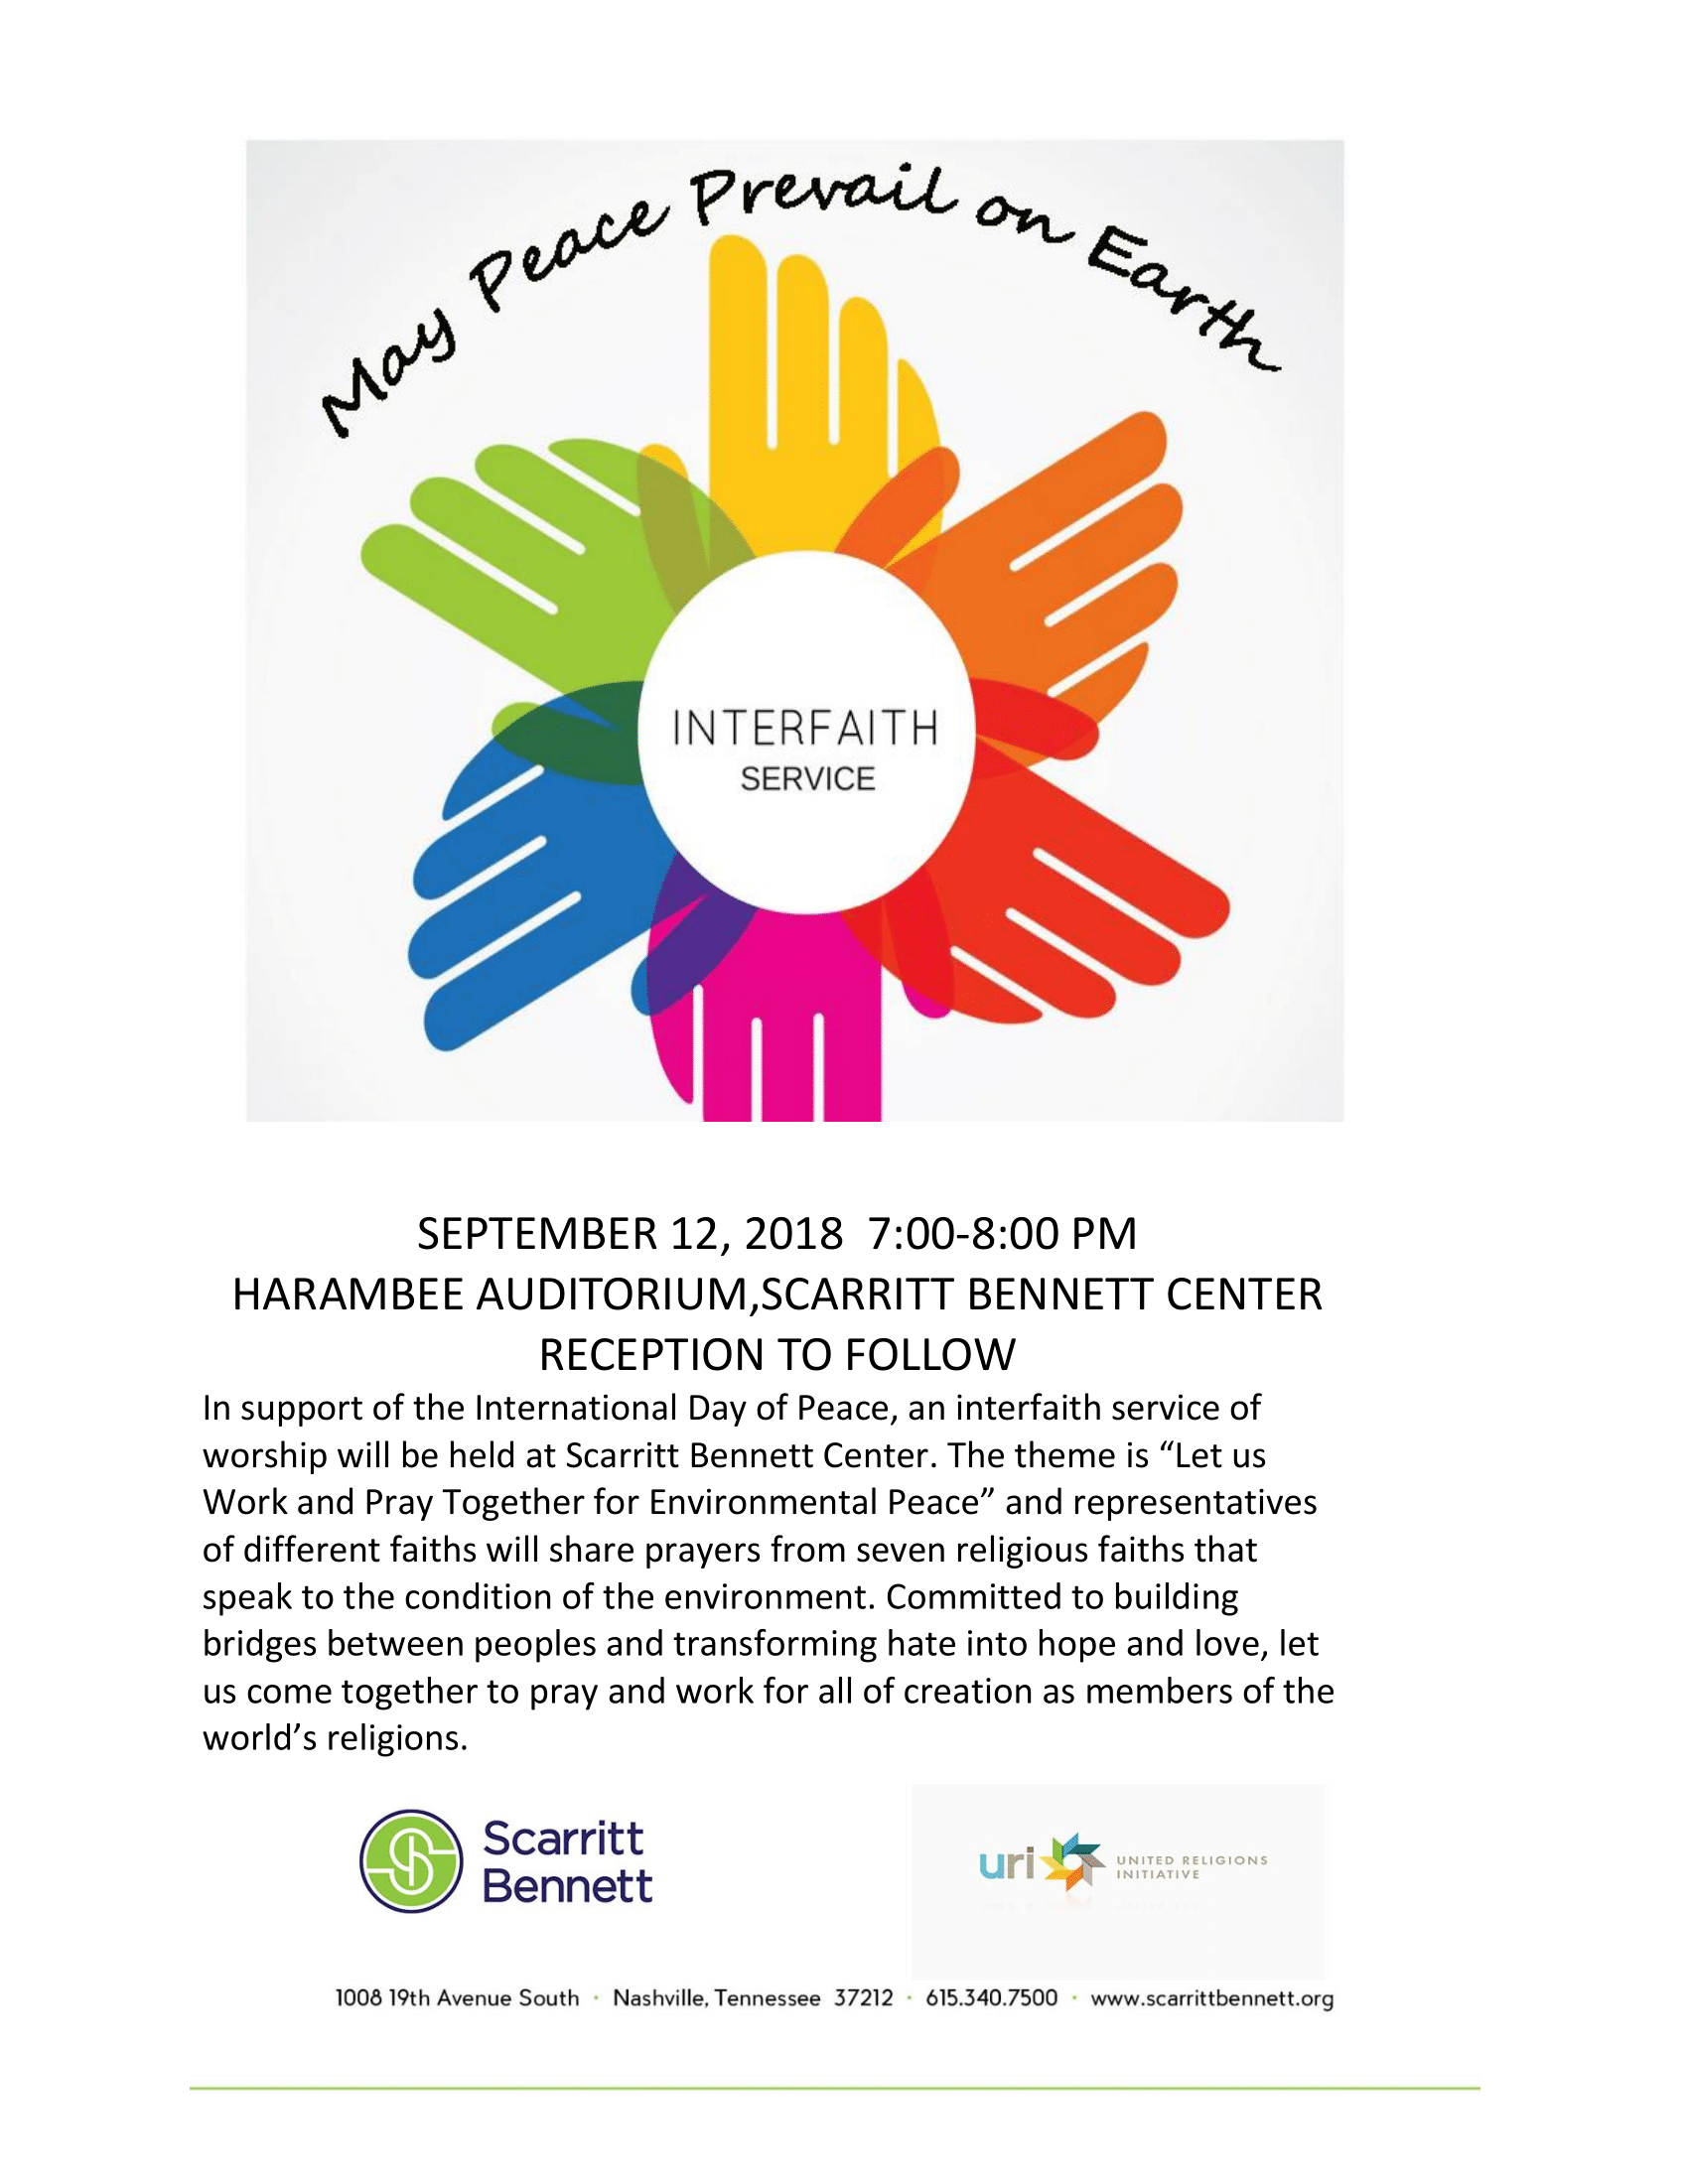 SEPTEMBER 12, 2018 7:00-8:00 PM  HARAMBEE AUDITORIUM,SCARRITT BENNETT CENTER  RECEPTION TO FOLLOW  In support of the International Day of Peace, an interfaith service of worship will be held at Scarritt Bennett Center. The theme is “Let us Work and Pray Together for Environmental Peace” and representatives of different faiths will share prayers from seven religious faiths that speak to the condition of the environment. Committed to building bridges between peoples and transforming hate into hope and love, let us come together to pray and work for all of creation as members of the world’s religions.